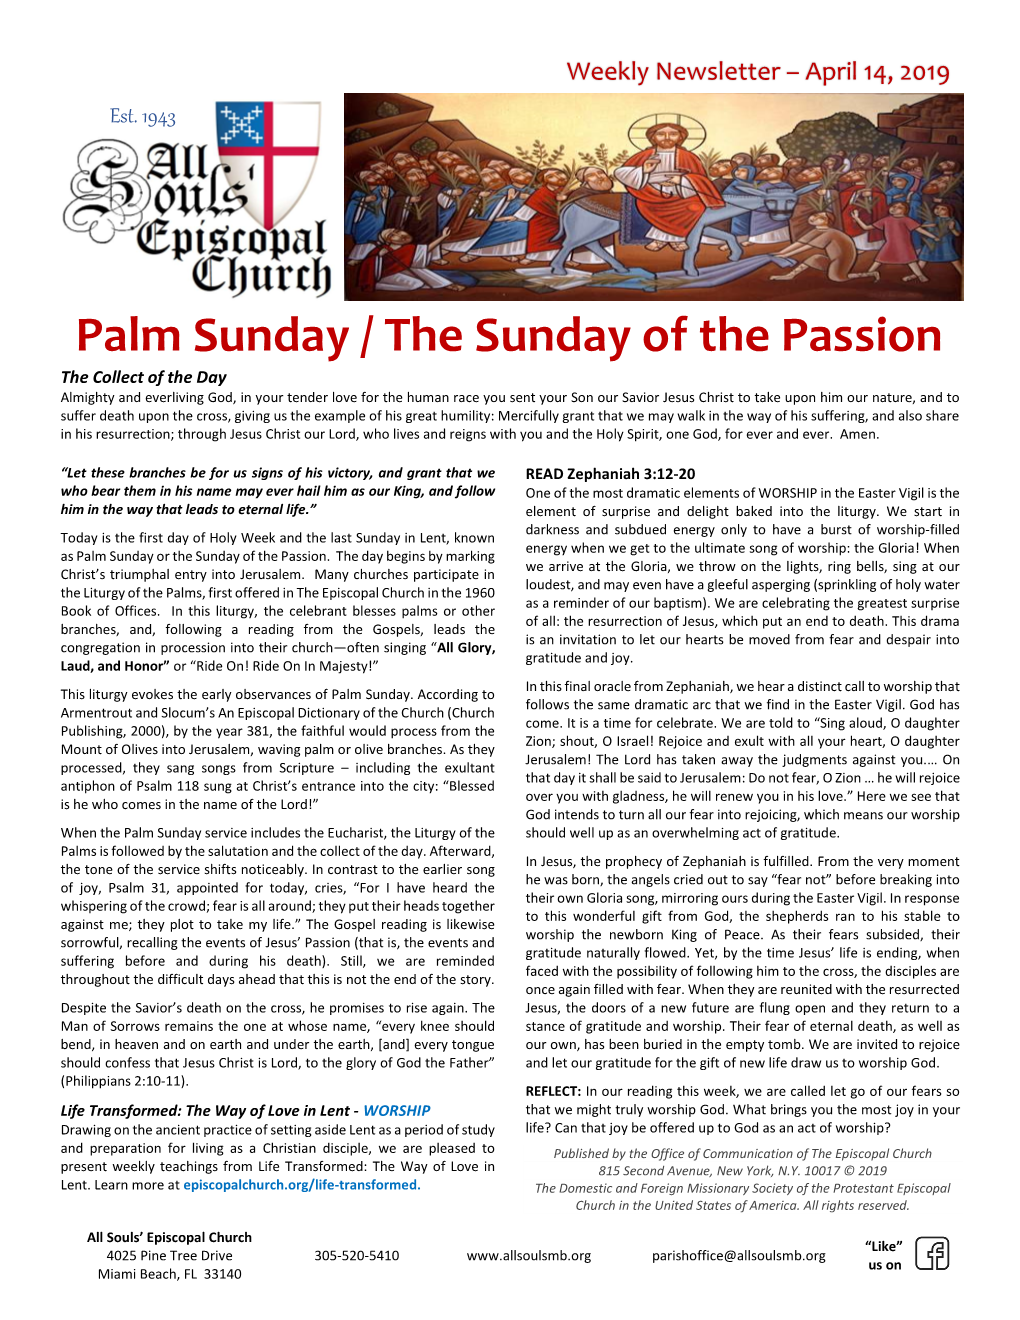 Palm Sunday / the Sunday of the Passion